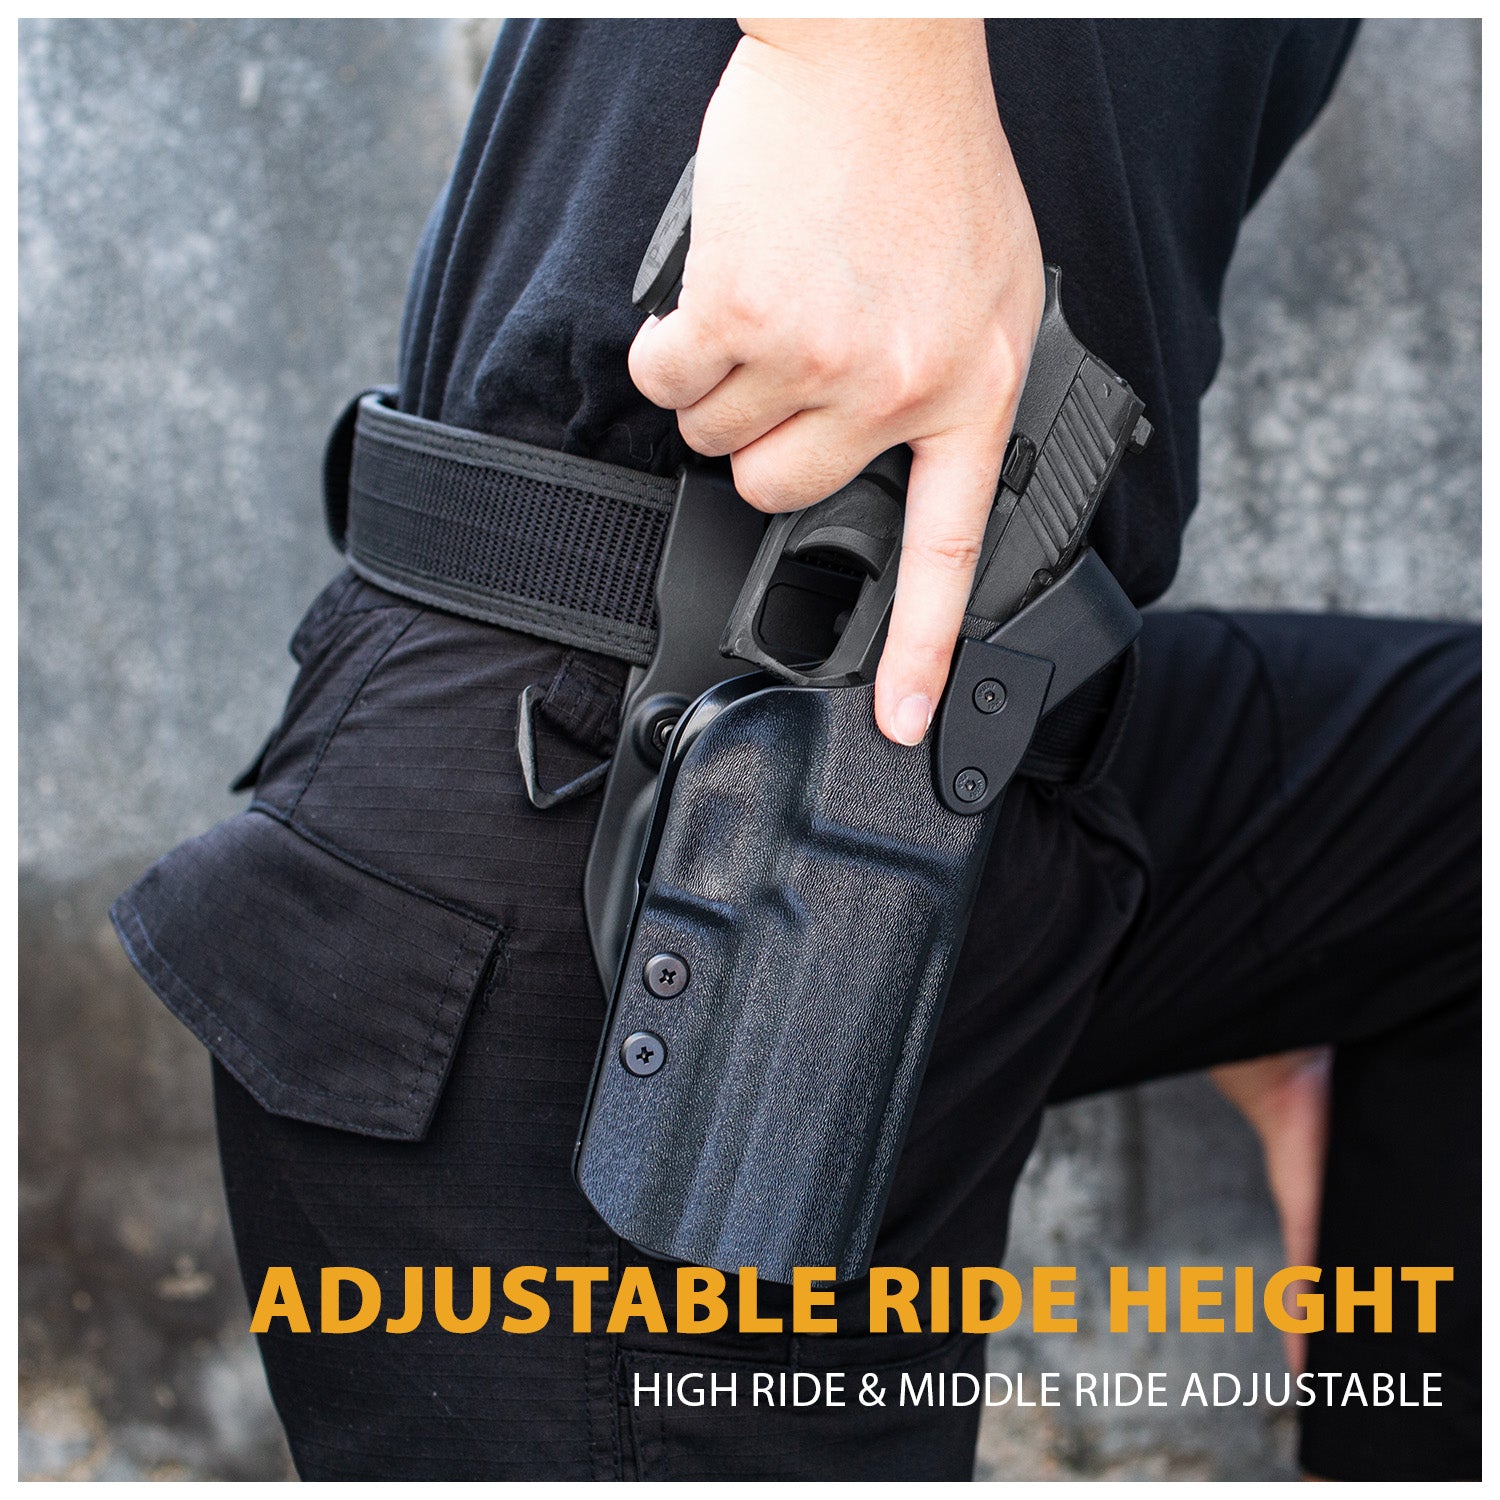 P320 Duty Holster Level II Retention w/Hook Guard & Rotating Hood: Sig Sauer P320 Full Size M17, Outside Waistband Holster Sig P320, Adj. Retention & Ride Height, Right|WARRIORLAND